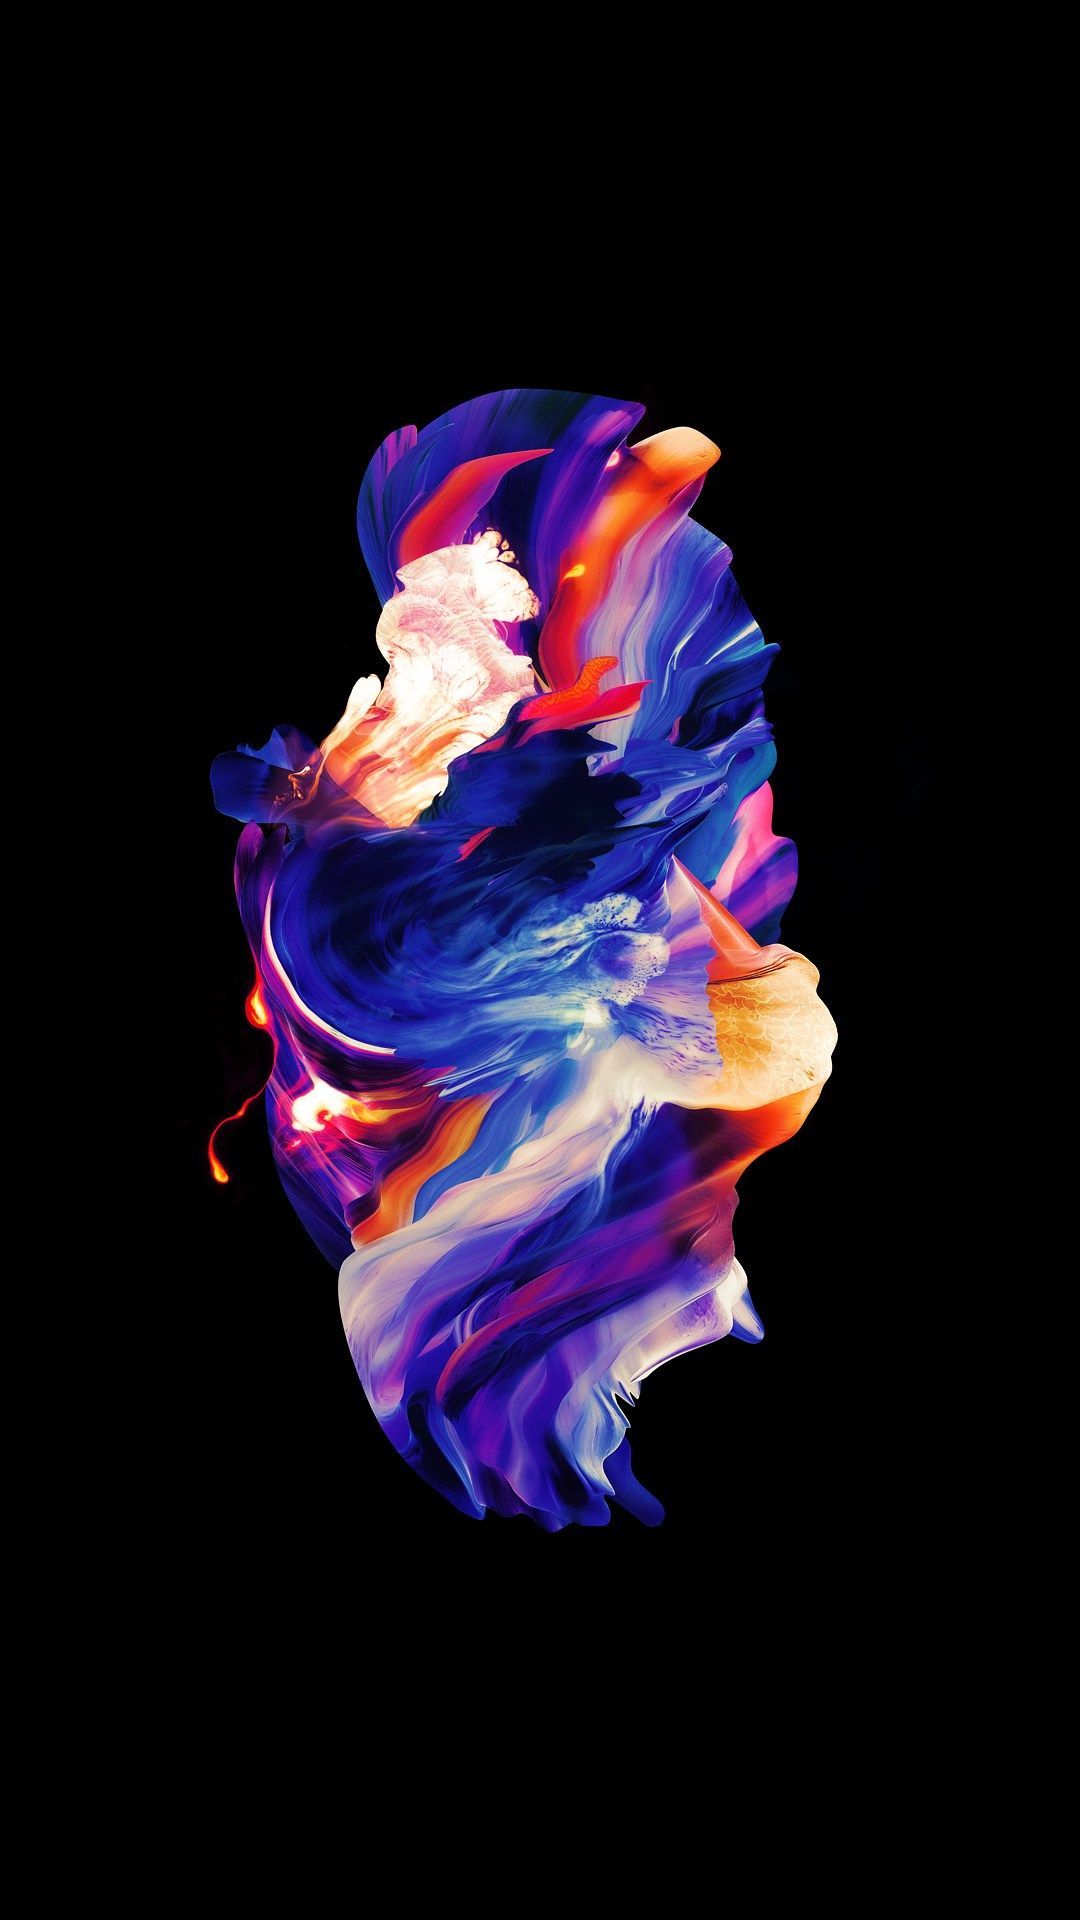 Dark Colorful to see more beautifully colored wallpaper! - Oneplus wallpaper, Minimalist wallpaper, Abstract iphone wallpaper